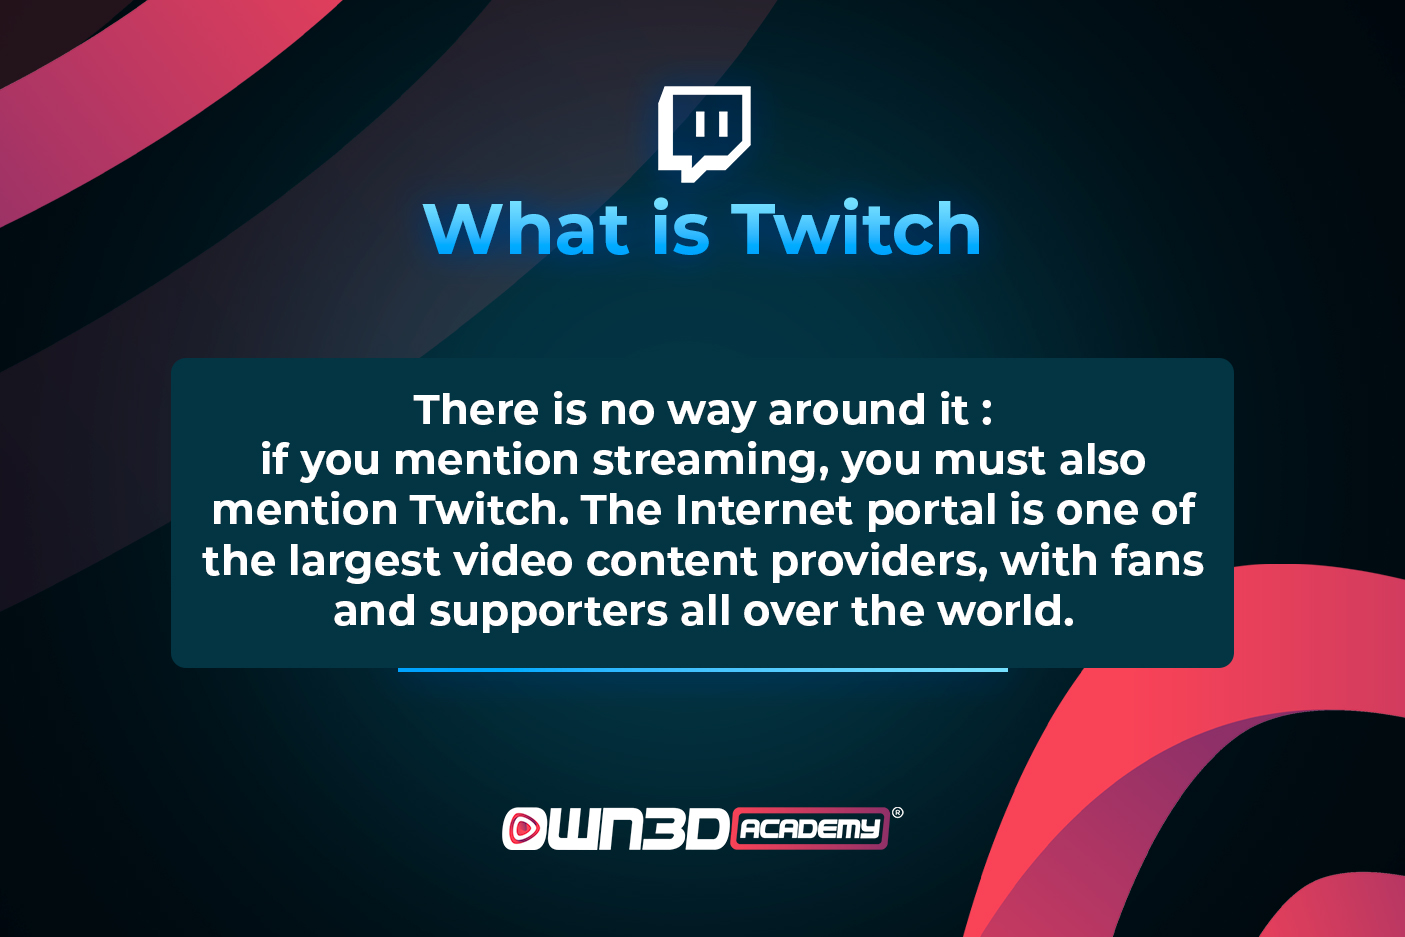 TWITCH_History-and-Keyfacts_ENG_what-is-twitch.jpg